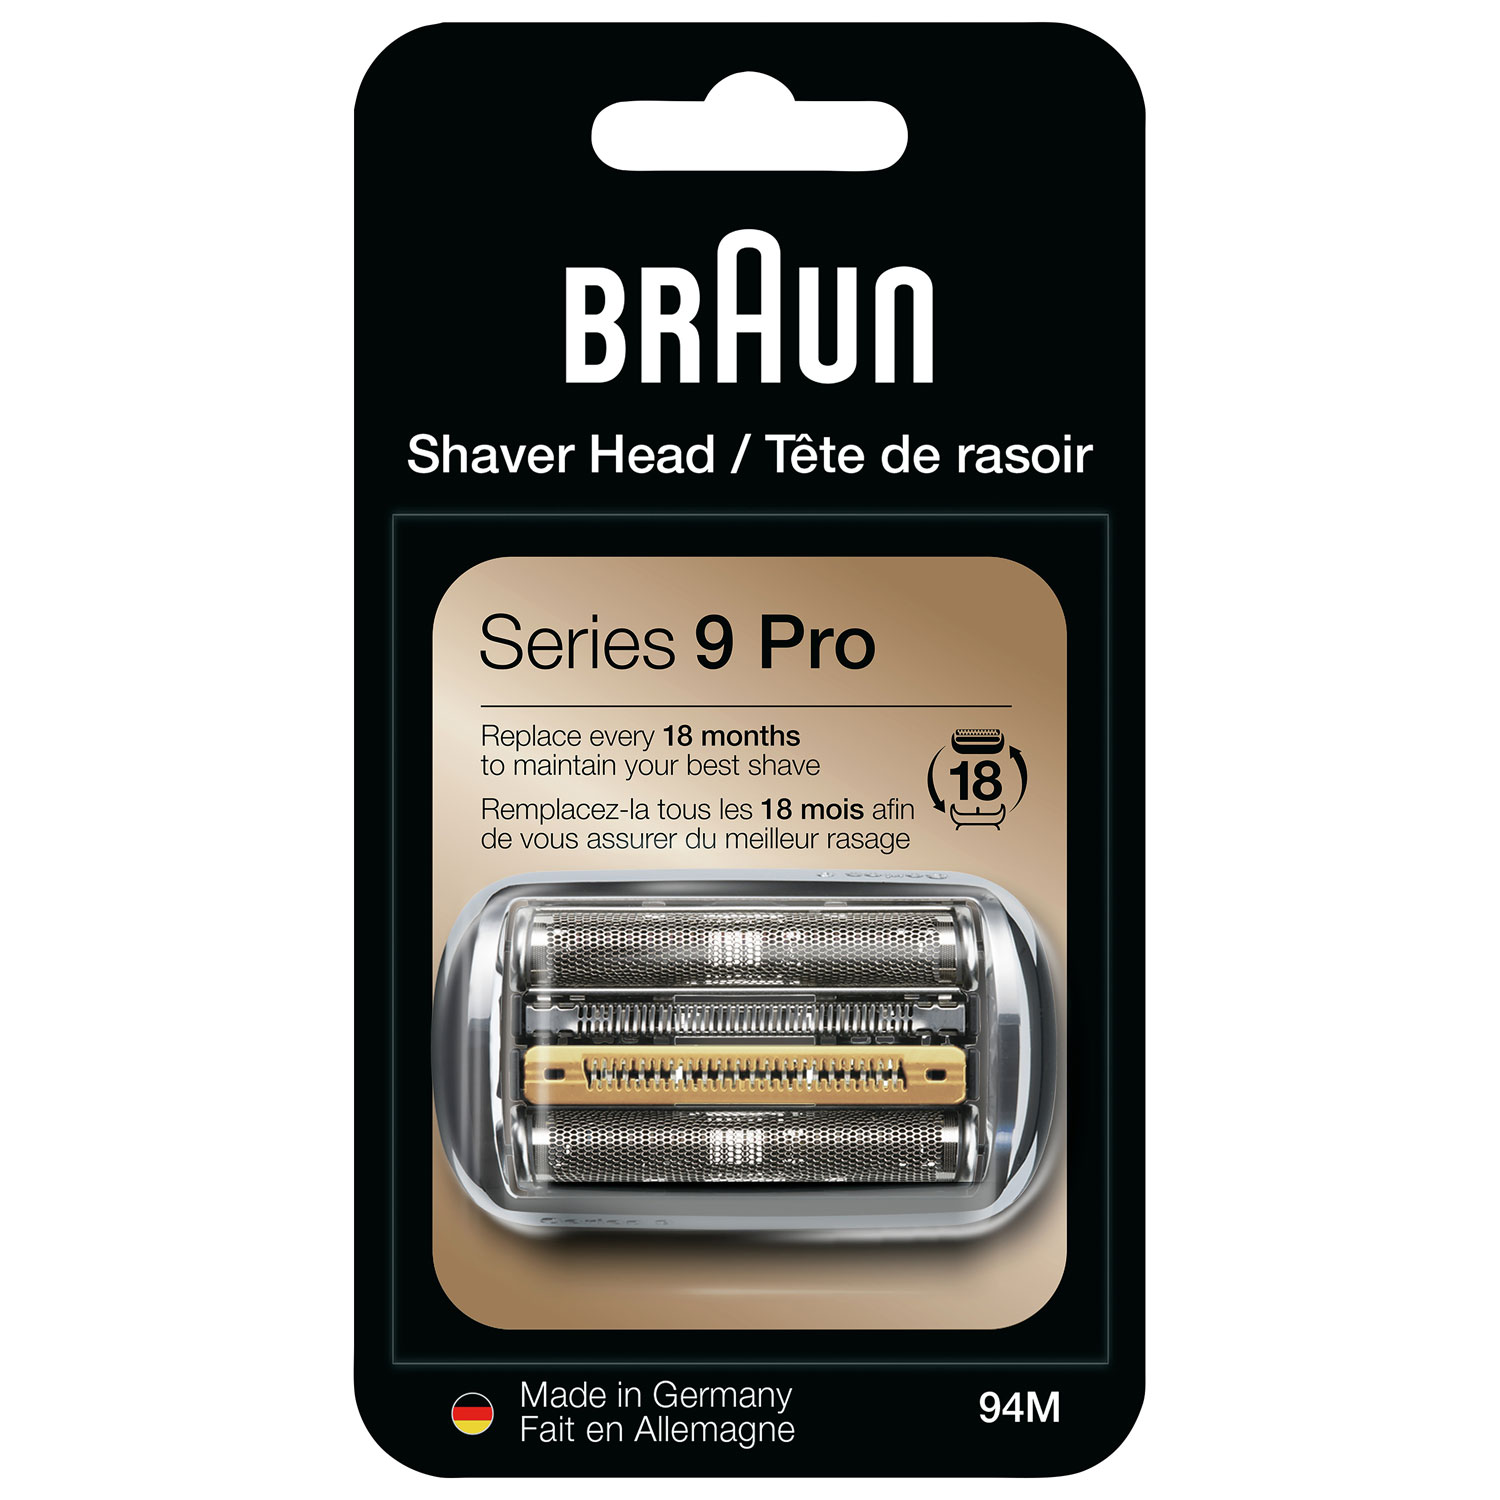 Braun Series 9 Pro Replacement Shaver Head (94m) - Silver